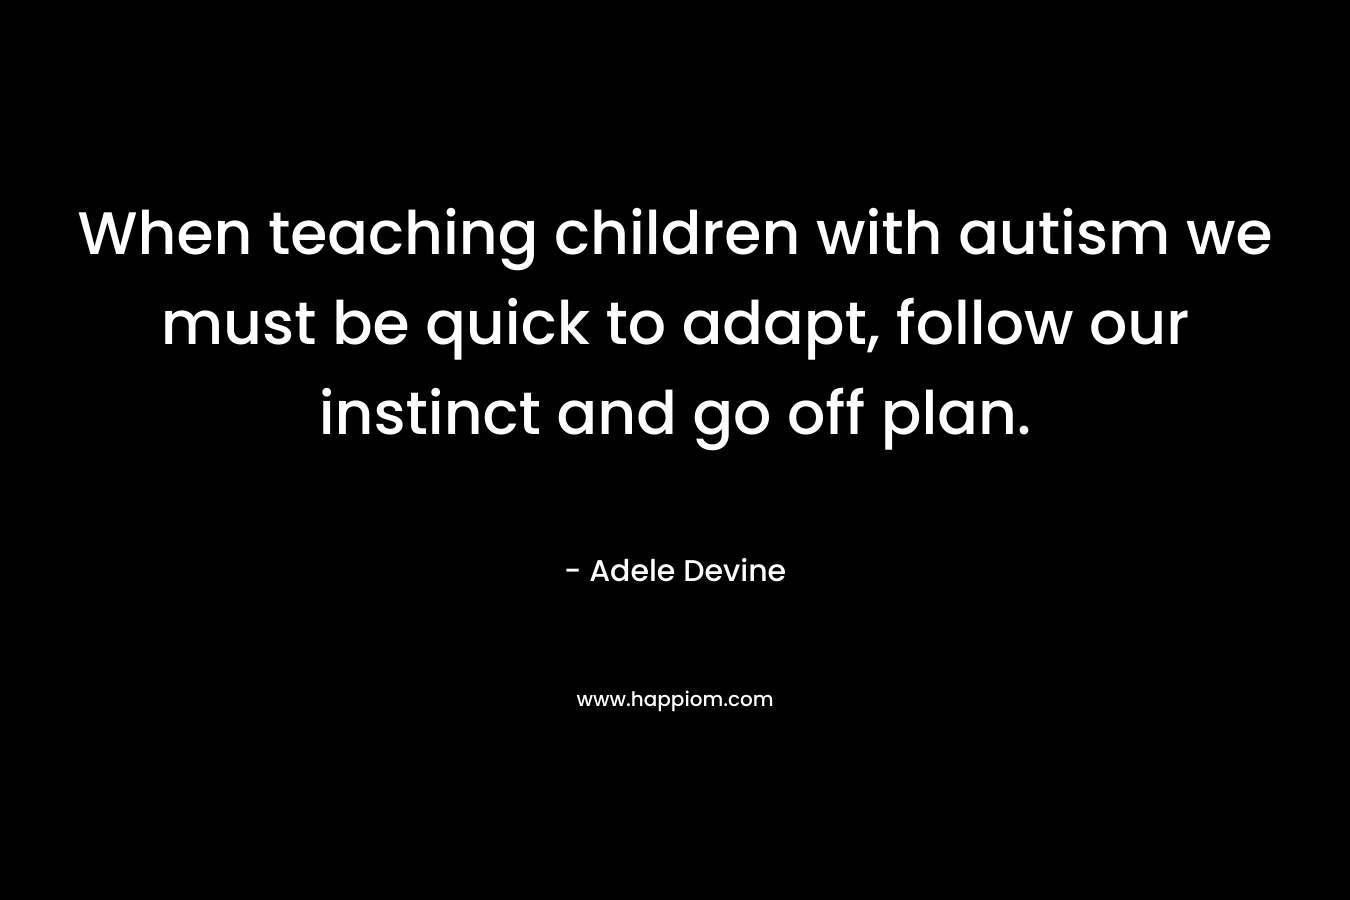 When teaching children with autism we must be quick to adapt, follow our instinct and go off plan. – Adele Devine